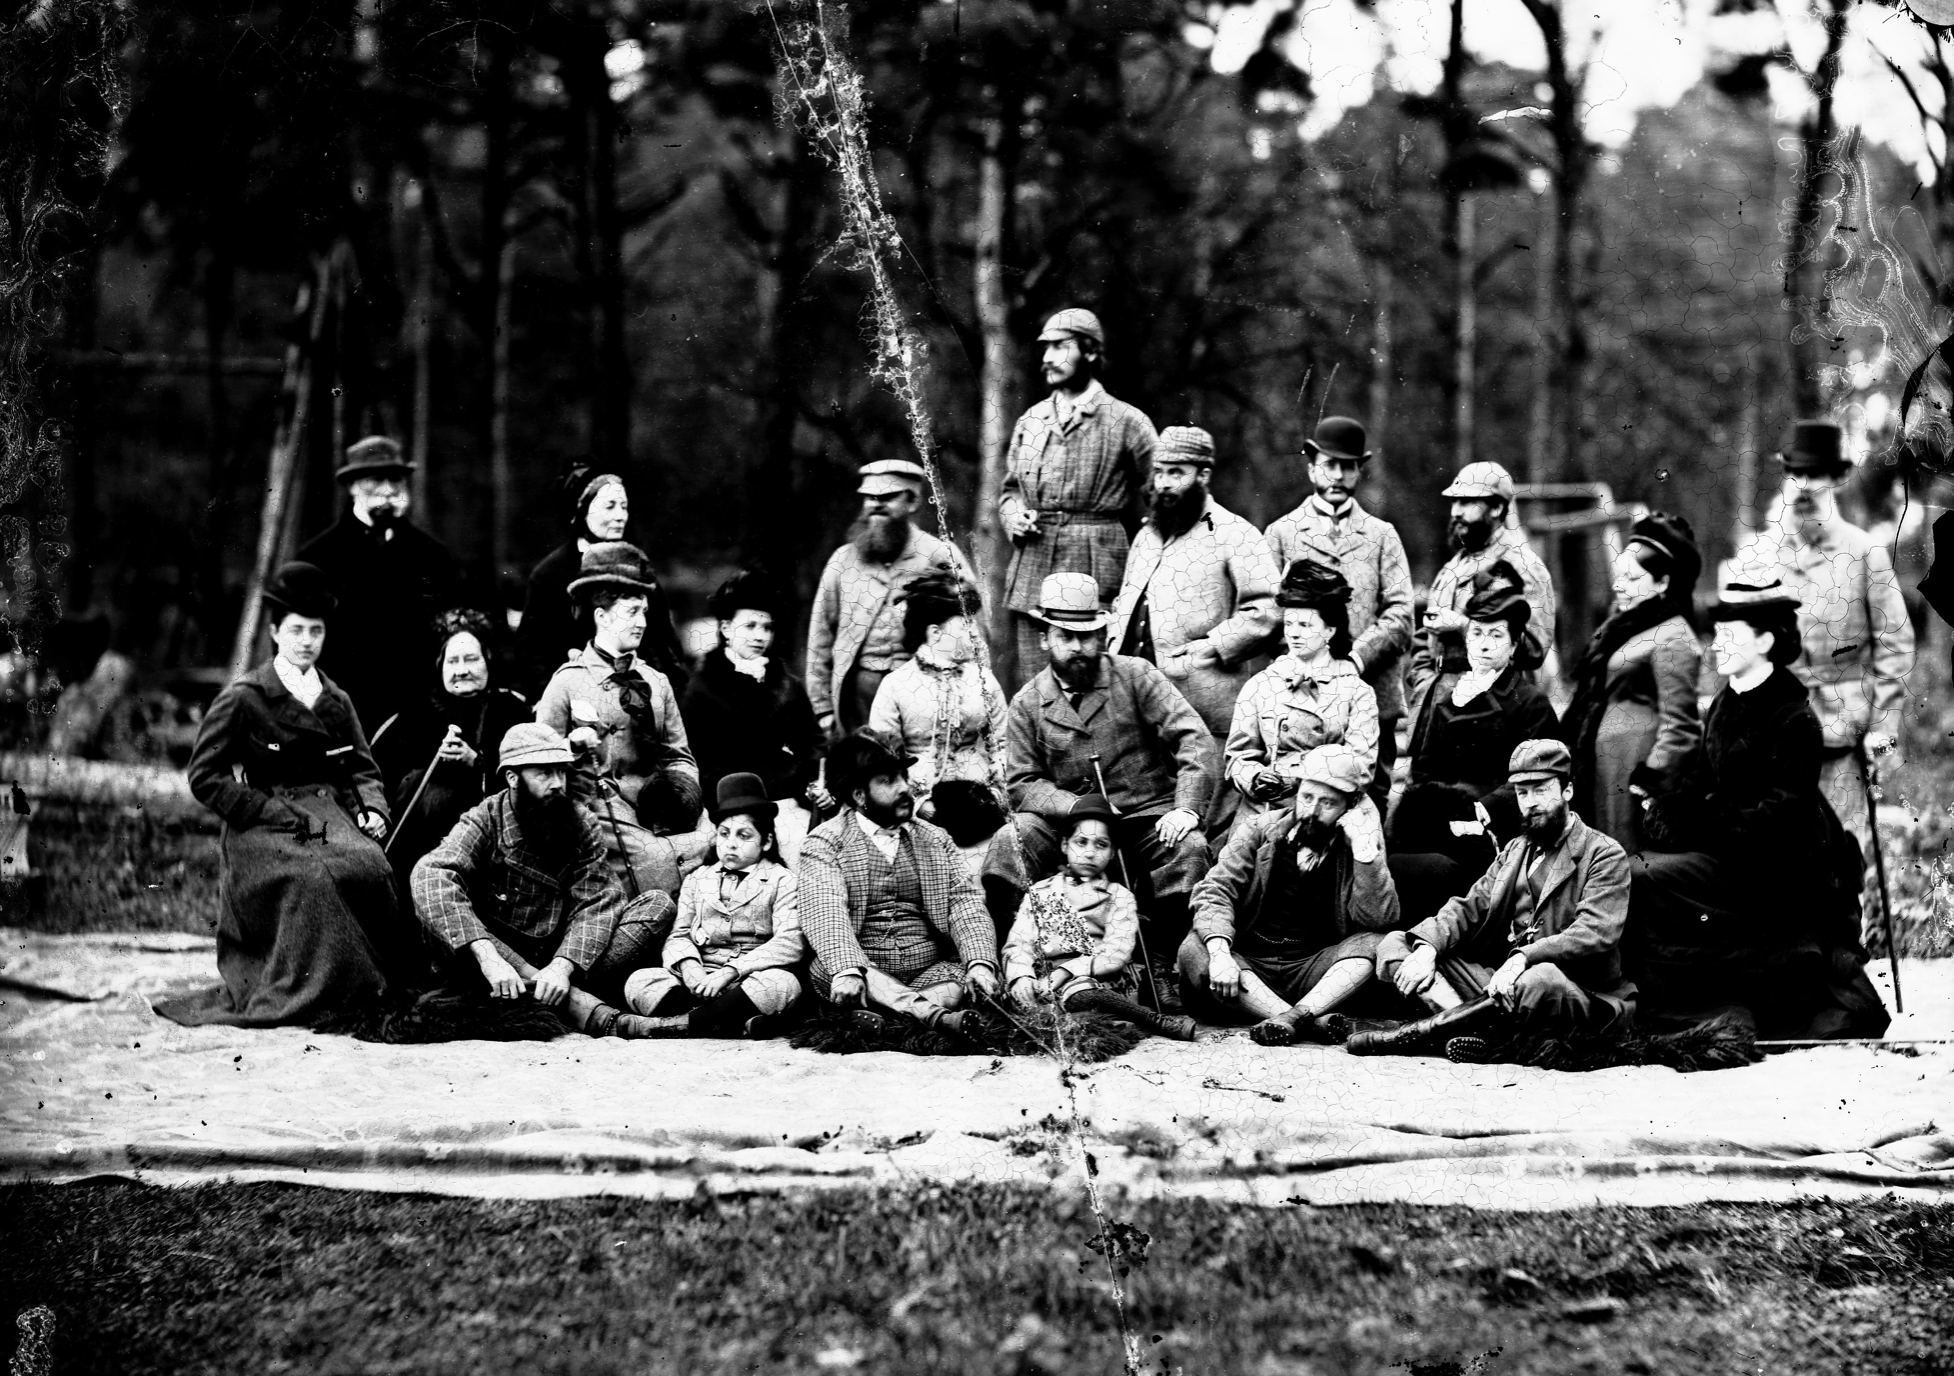 Maharajah’s group at Elveden Hall, pre 1890 